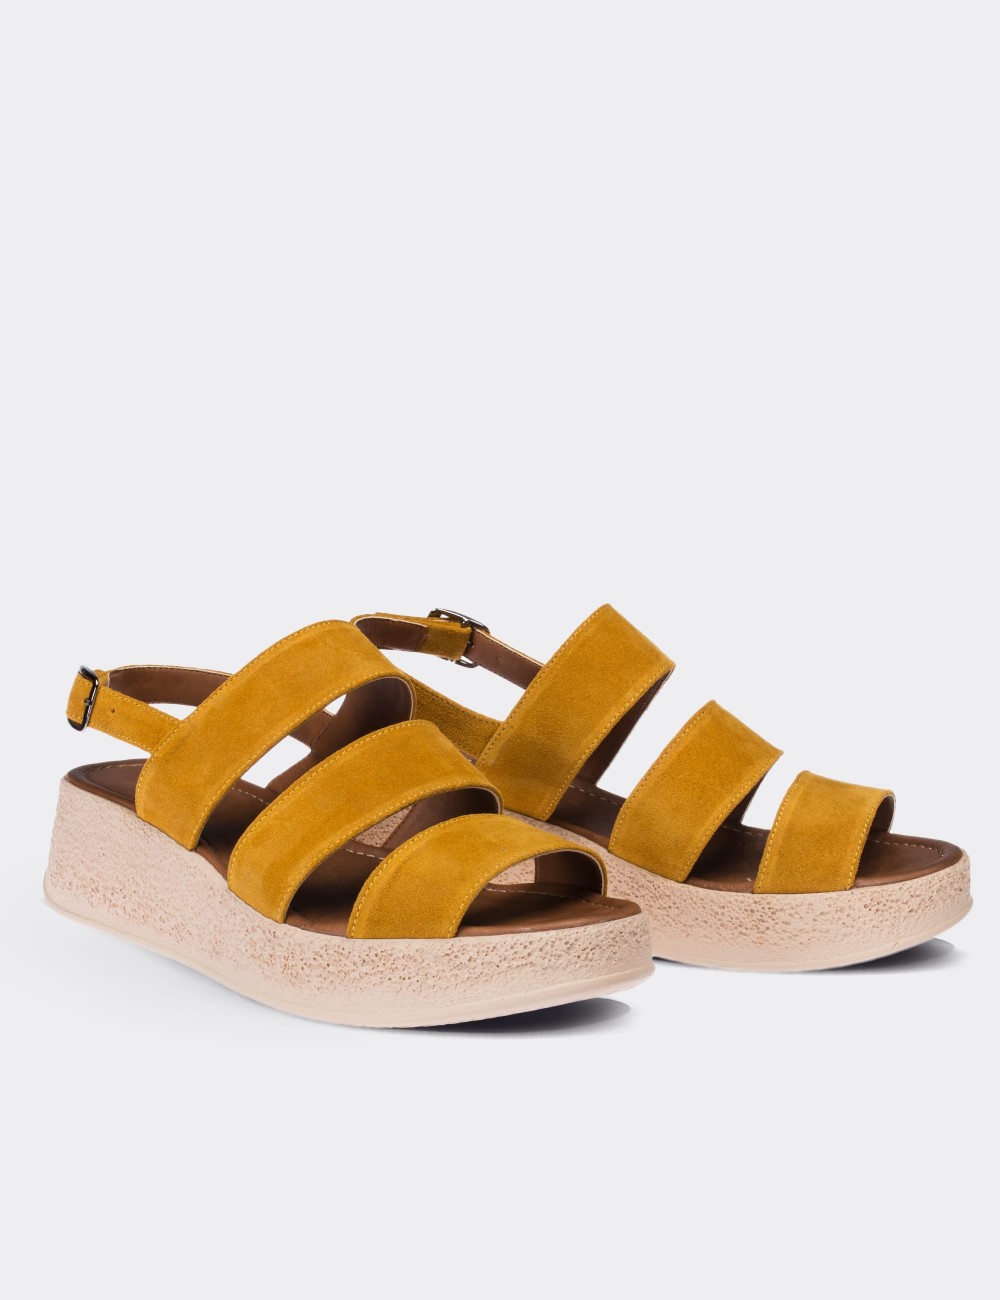 Yellow Suede Leather Sandals - 02123ZHRDP01